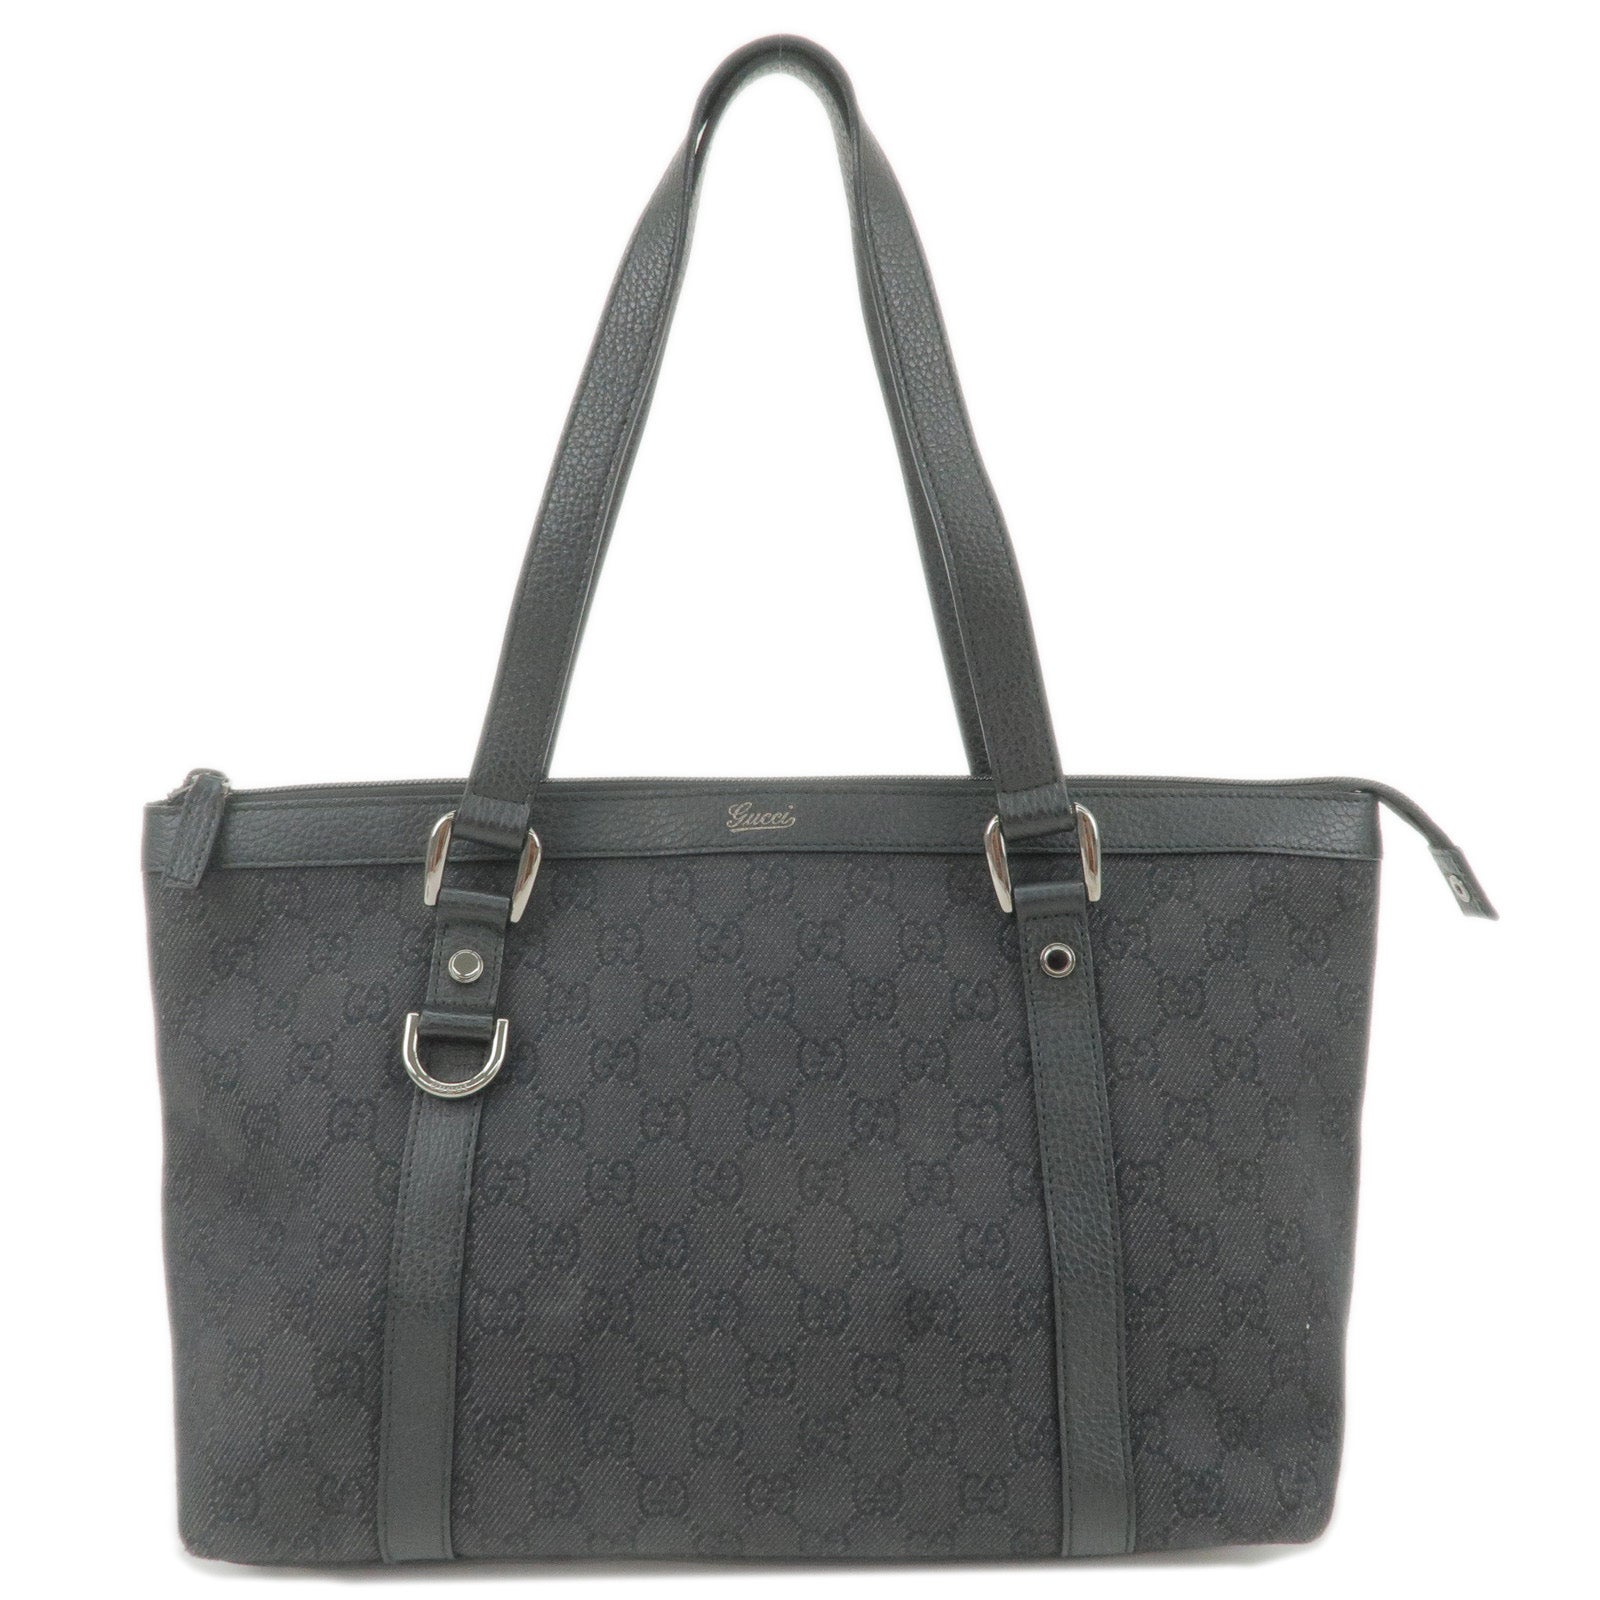 GUCCI-Abbey-GG-Canvas-Leather-Tote-Bag-Hand-Bag-Black-268640